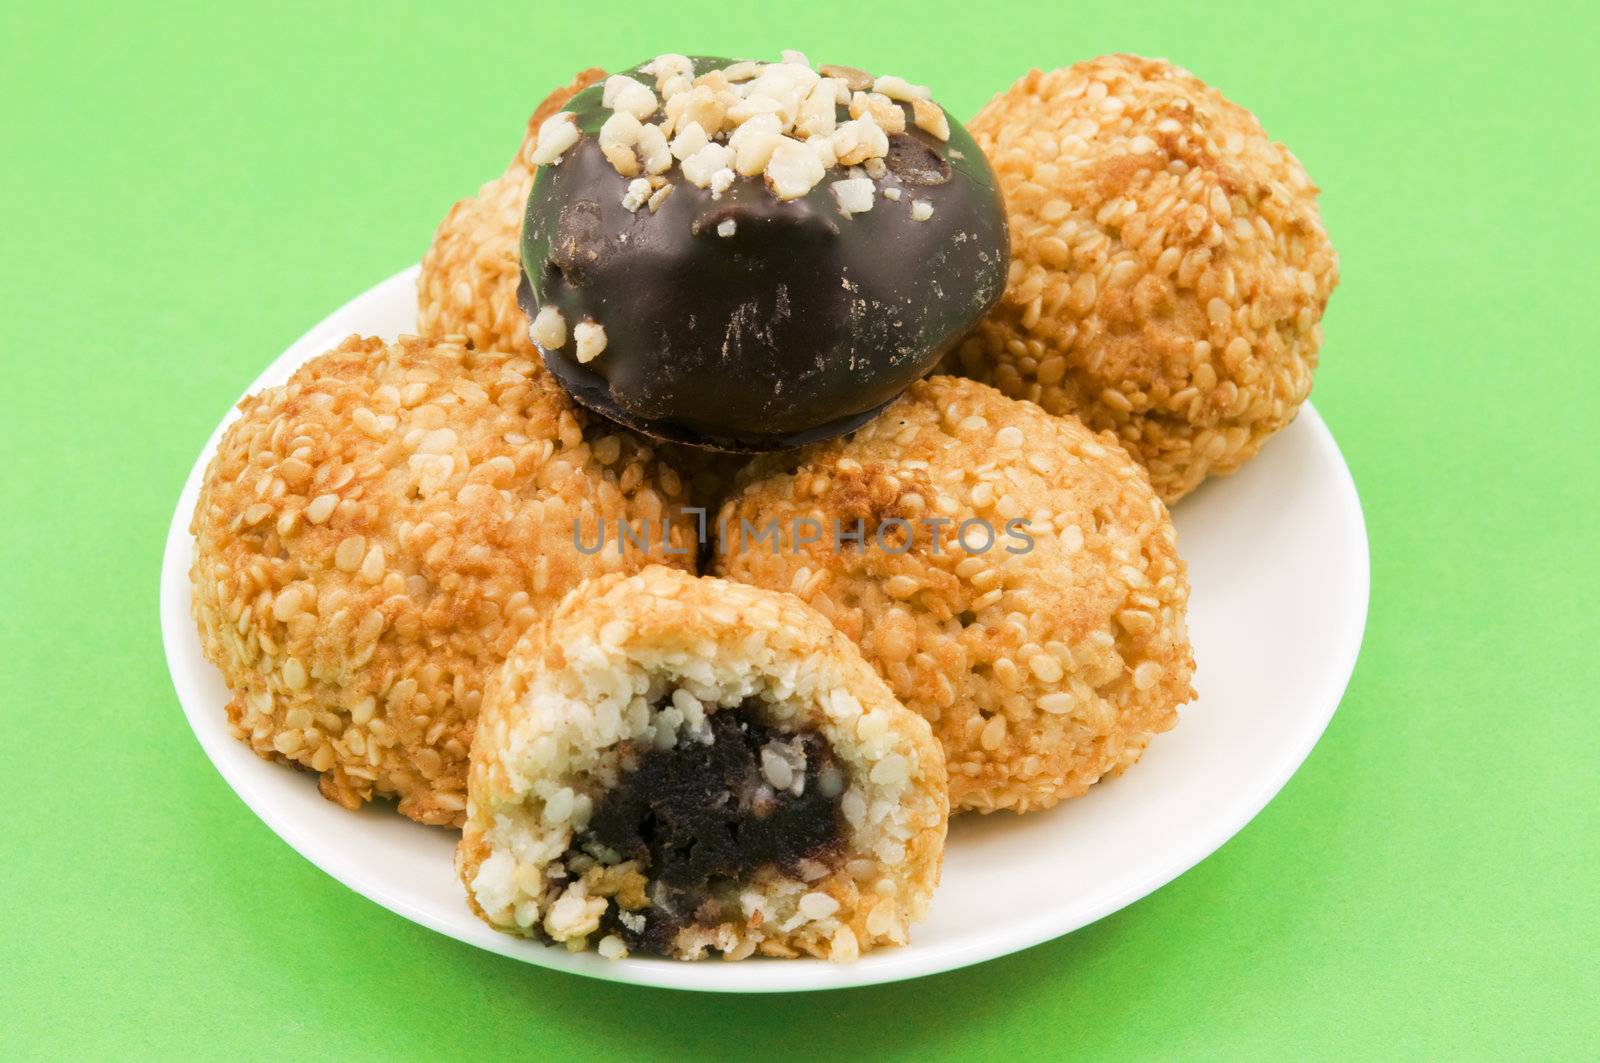 	
	
balls coconut cookies with chocolate filling and a chocolate covered
